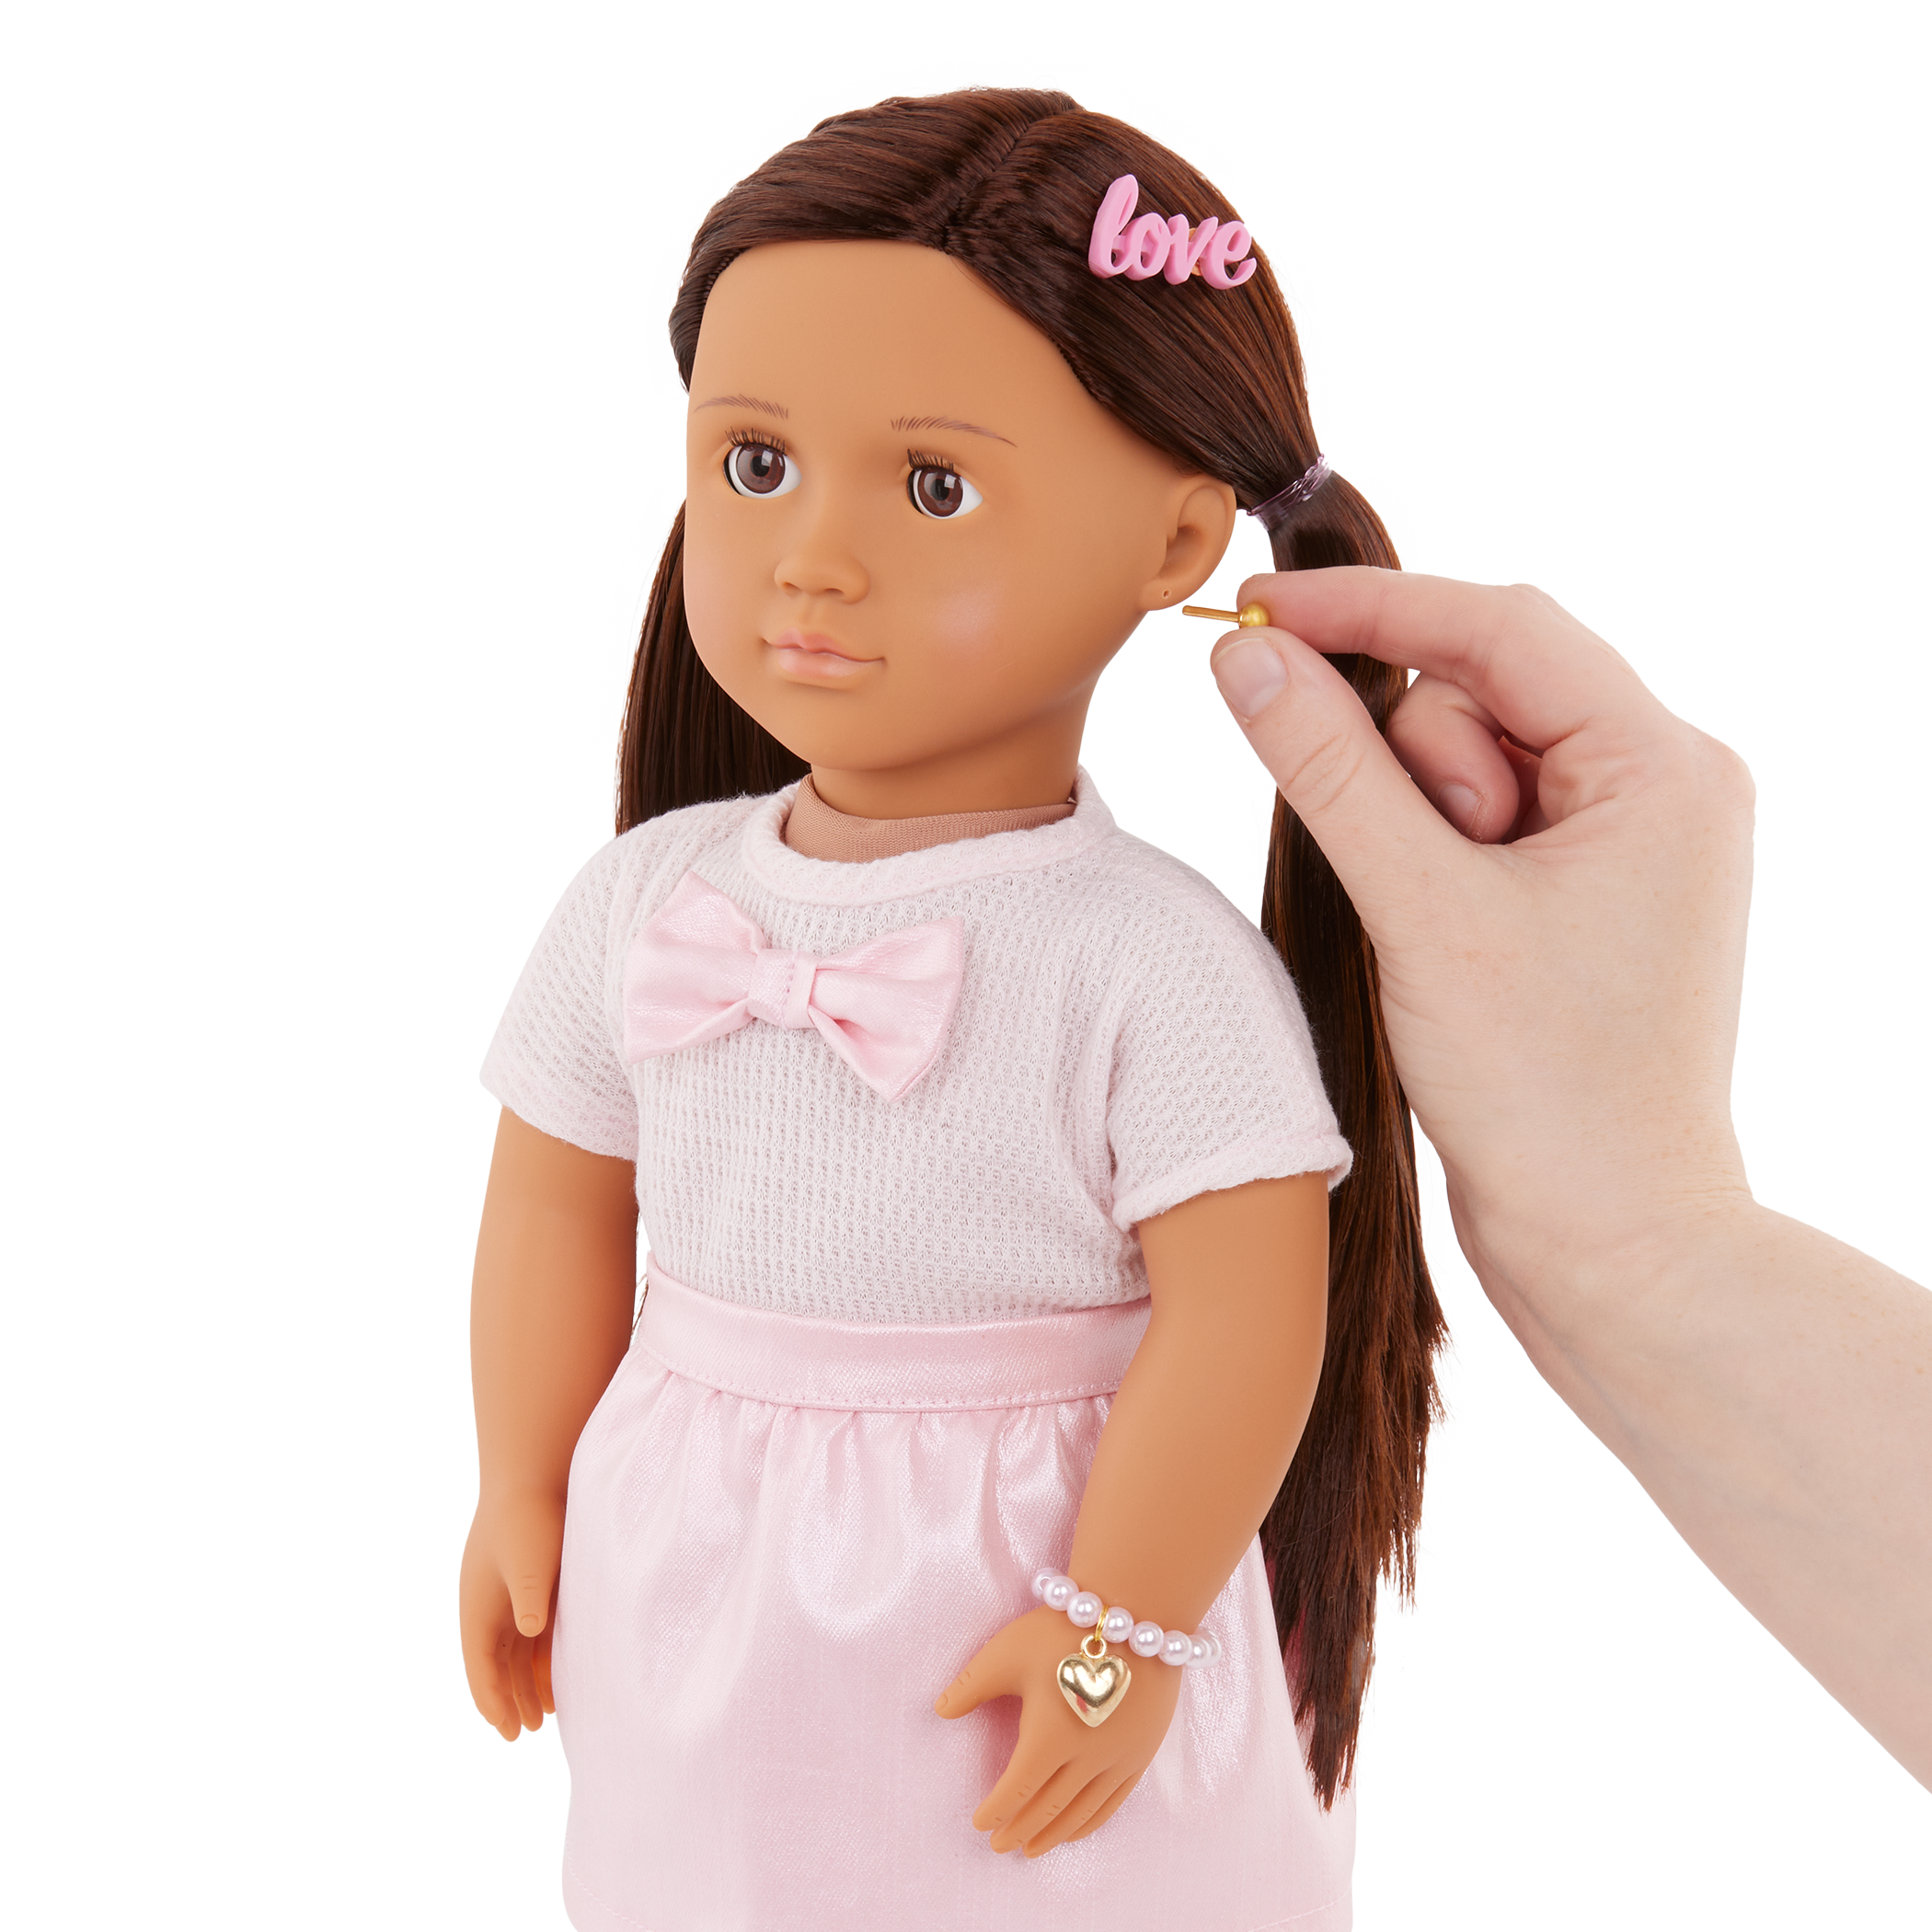 Our Generation 18-inch Jewelry Doll Cristina